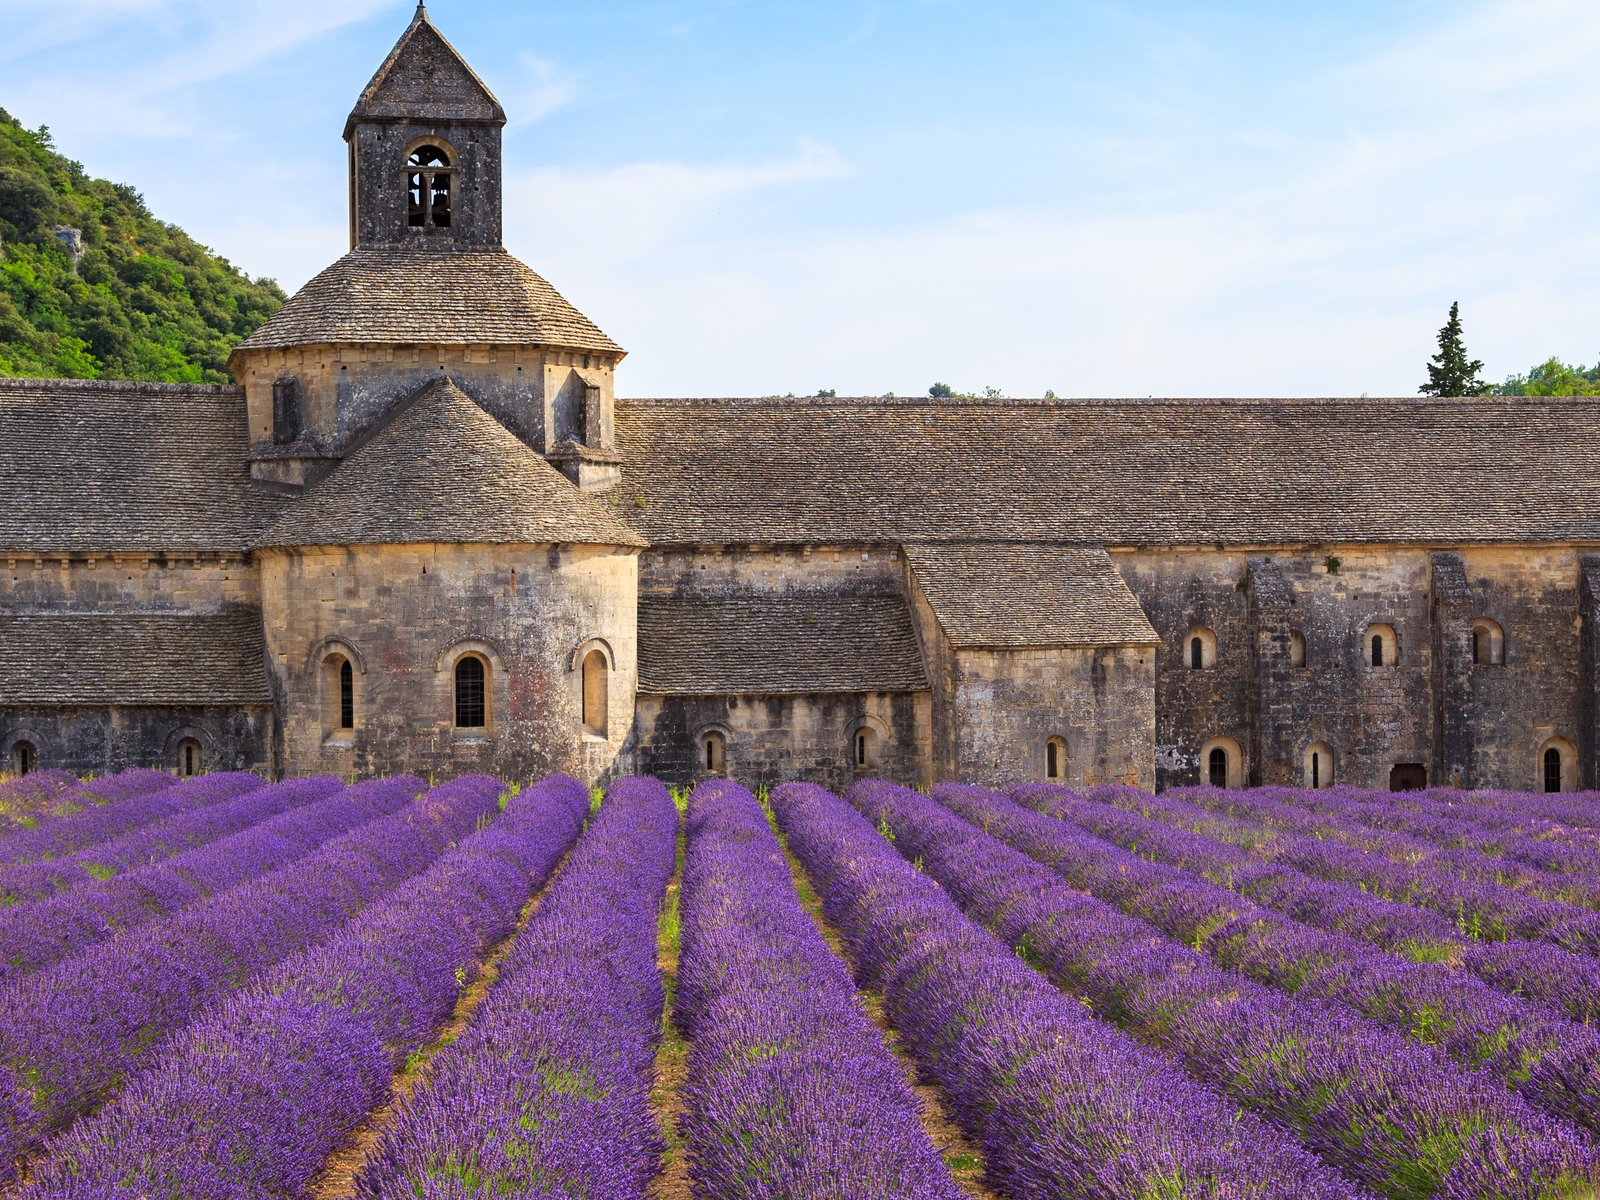 Abbaye Notre-Dame de Sénanque surrounded by rows of lavender in Provence.